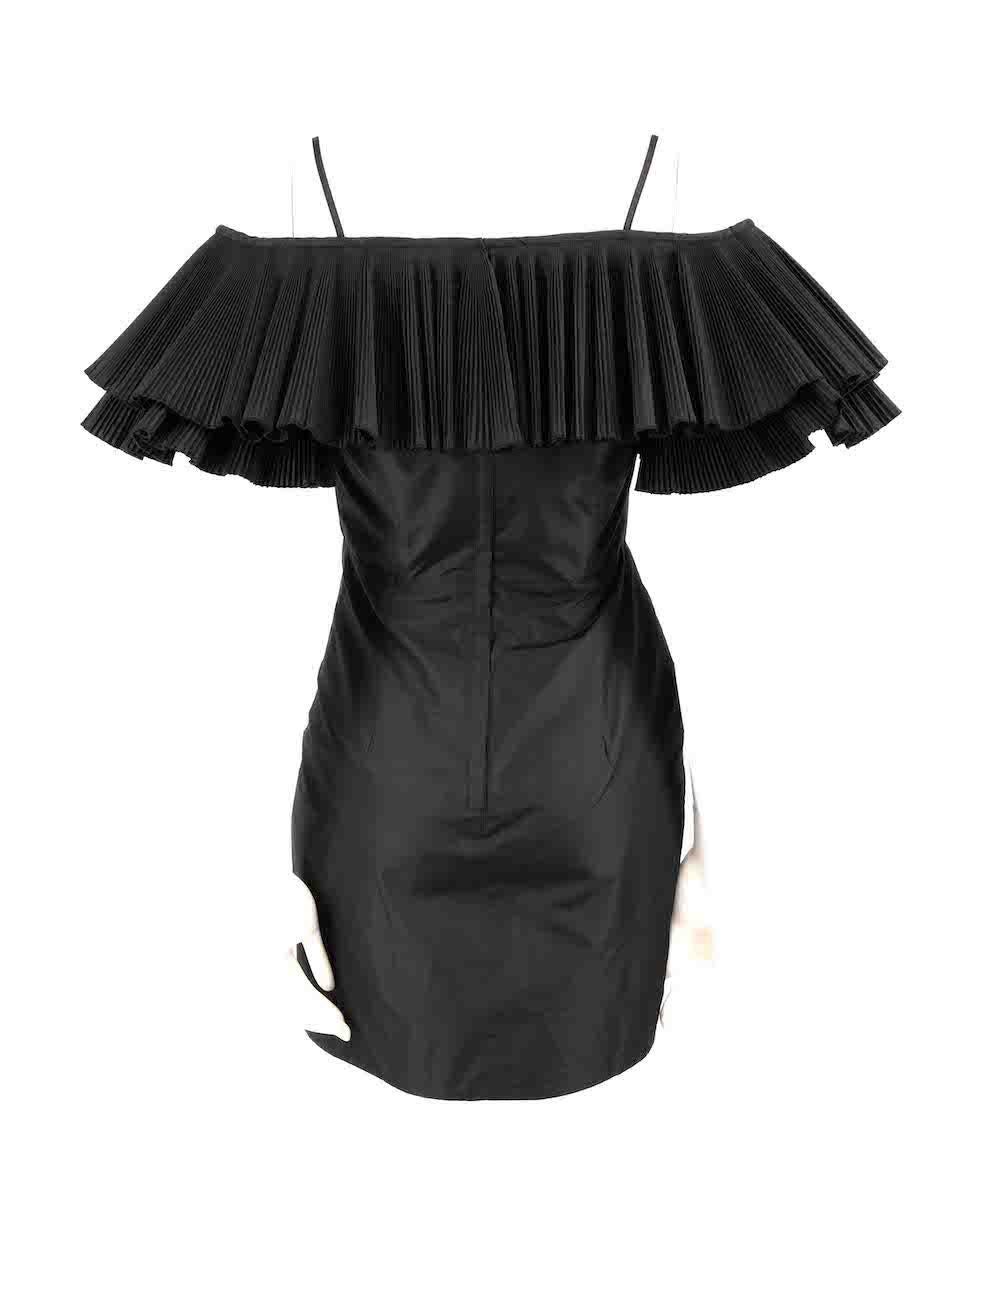 Alessandra Rich Black Pleated Ruffle Trim Dress Size S In Excellent Condition For Sale In London, GB